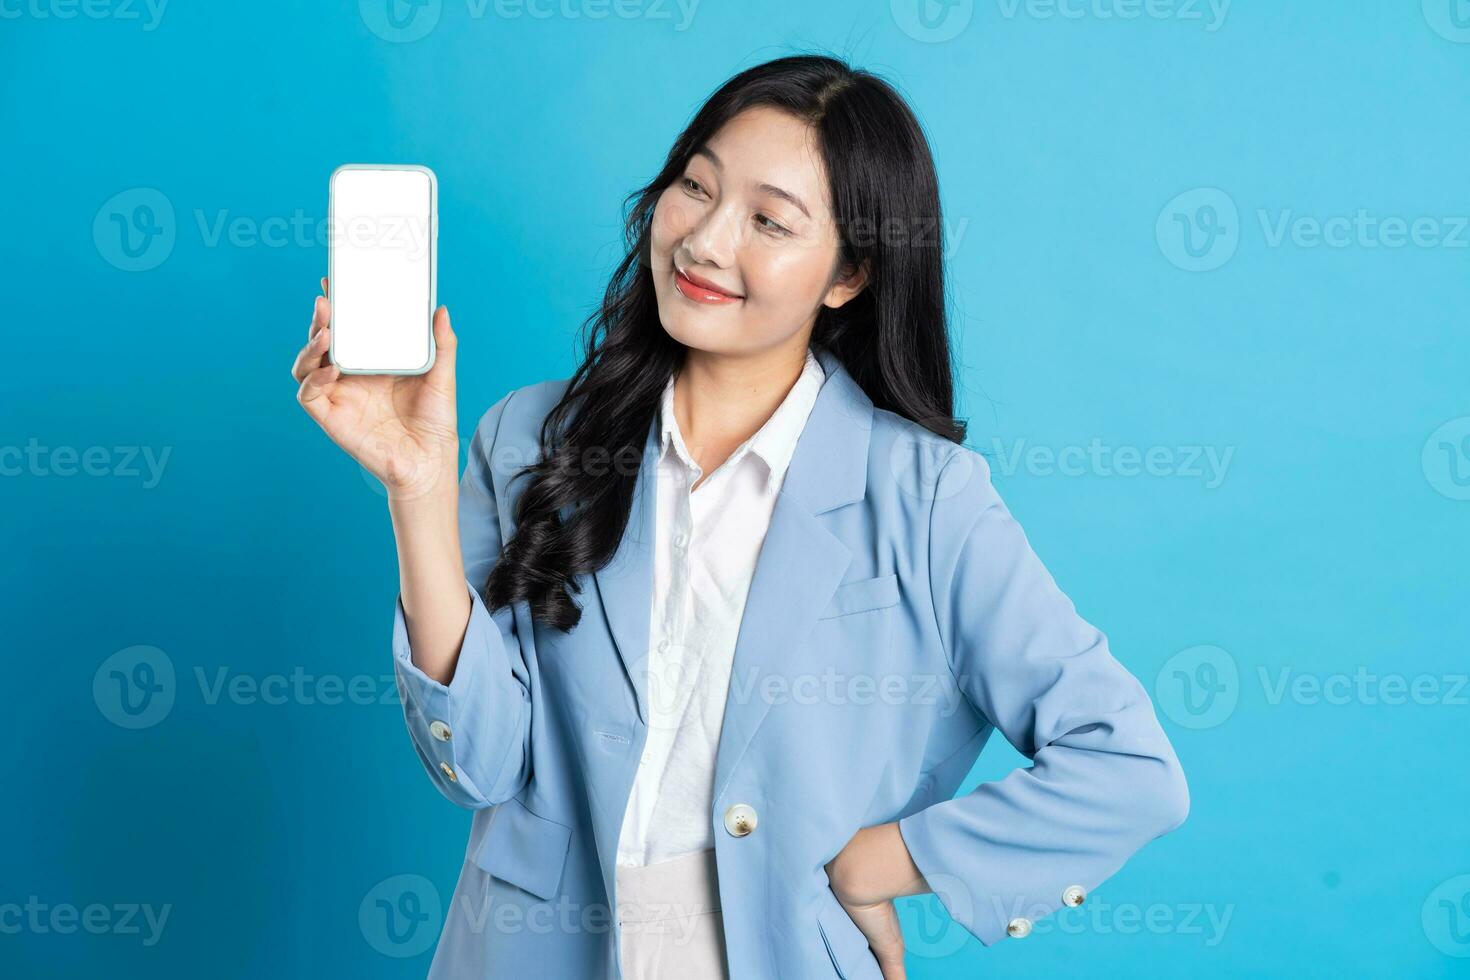 portrait of young asian businesswoman posing on blue background photo